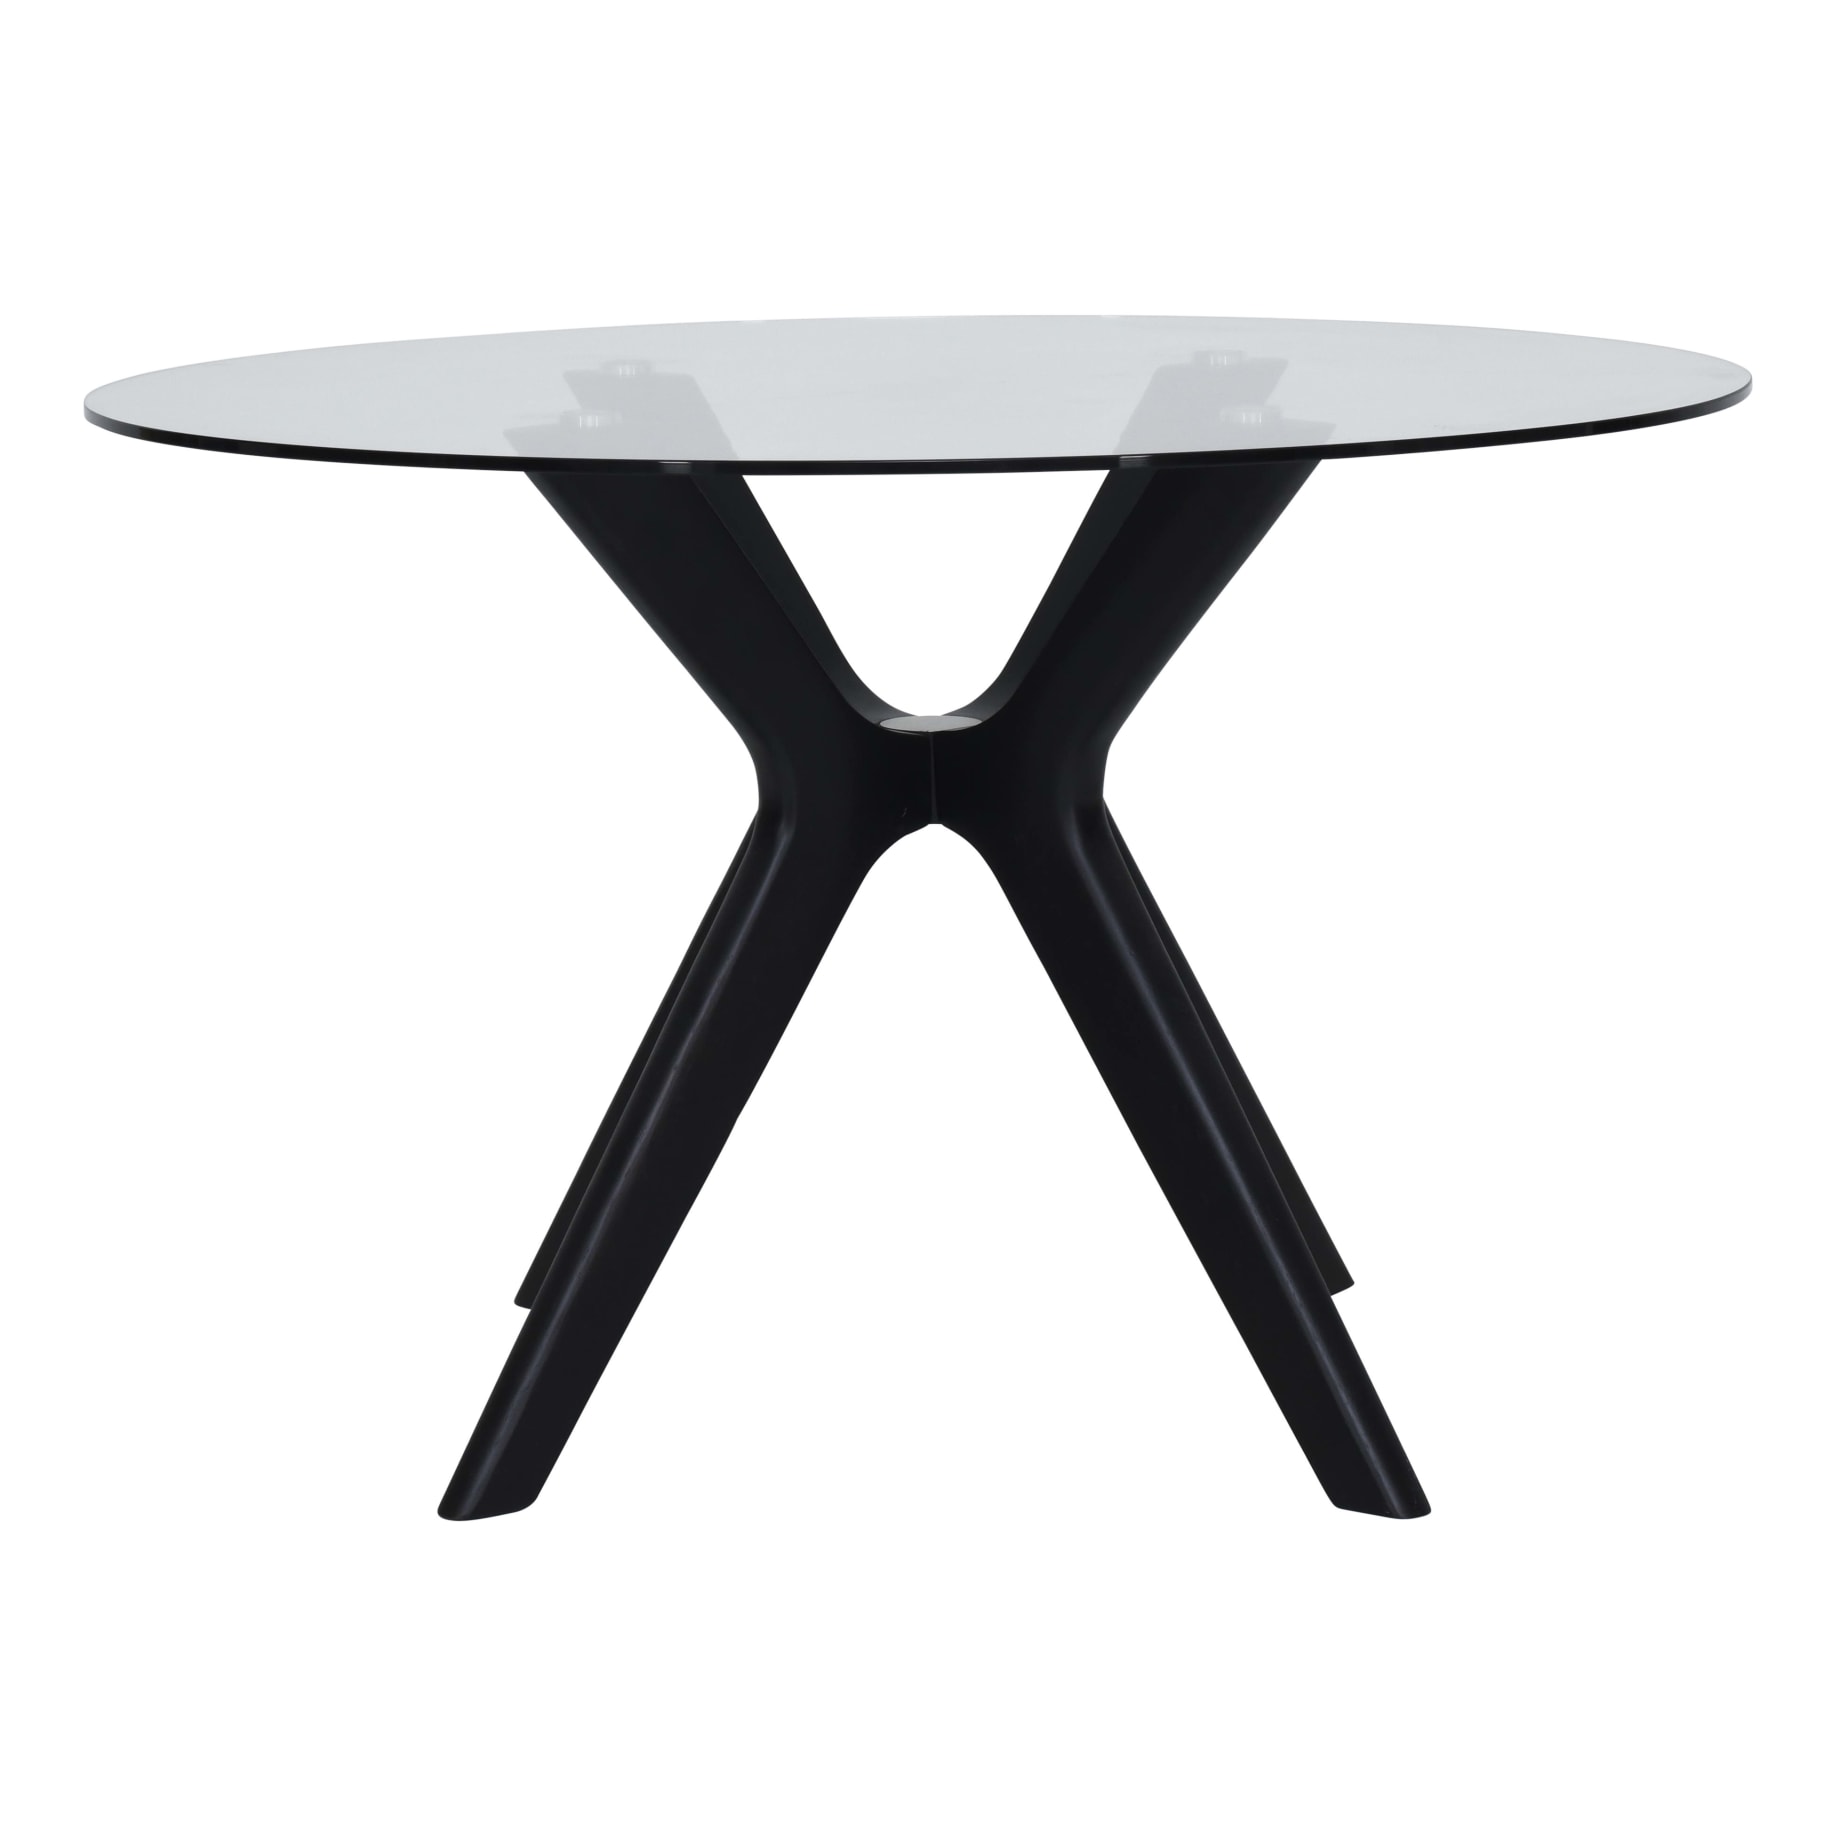 Padma Round 100cm Dining Table in Glass/Black